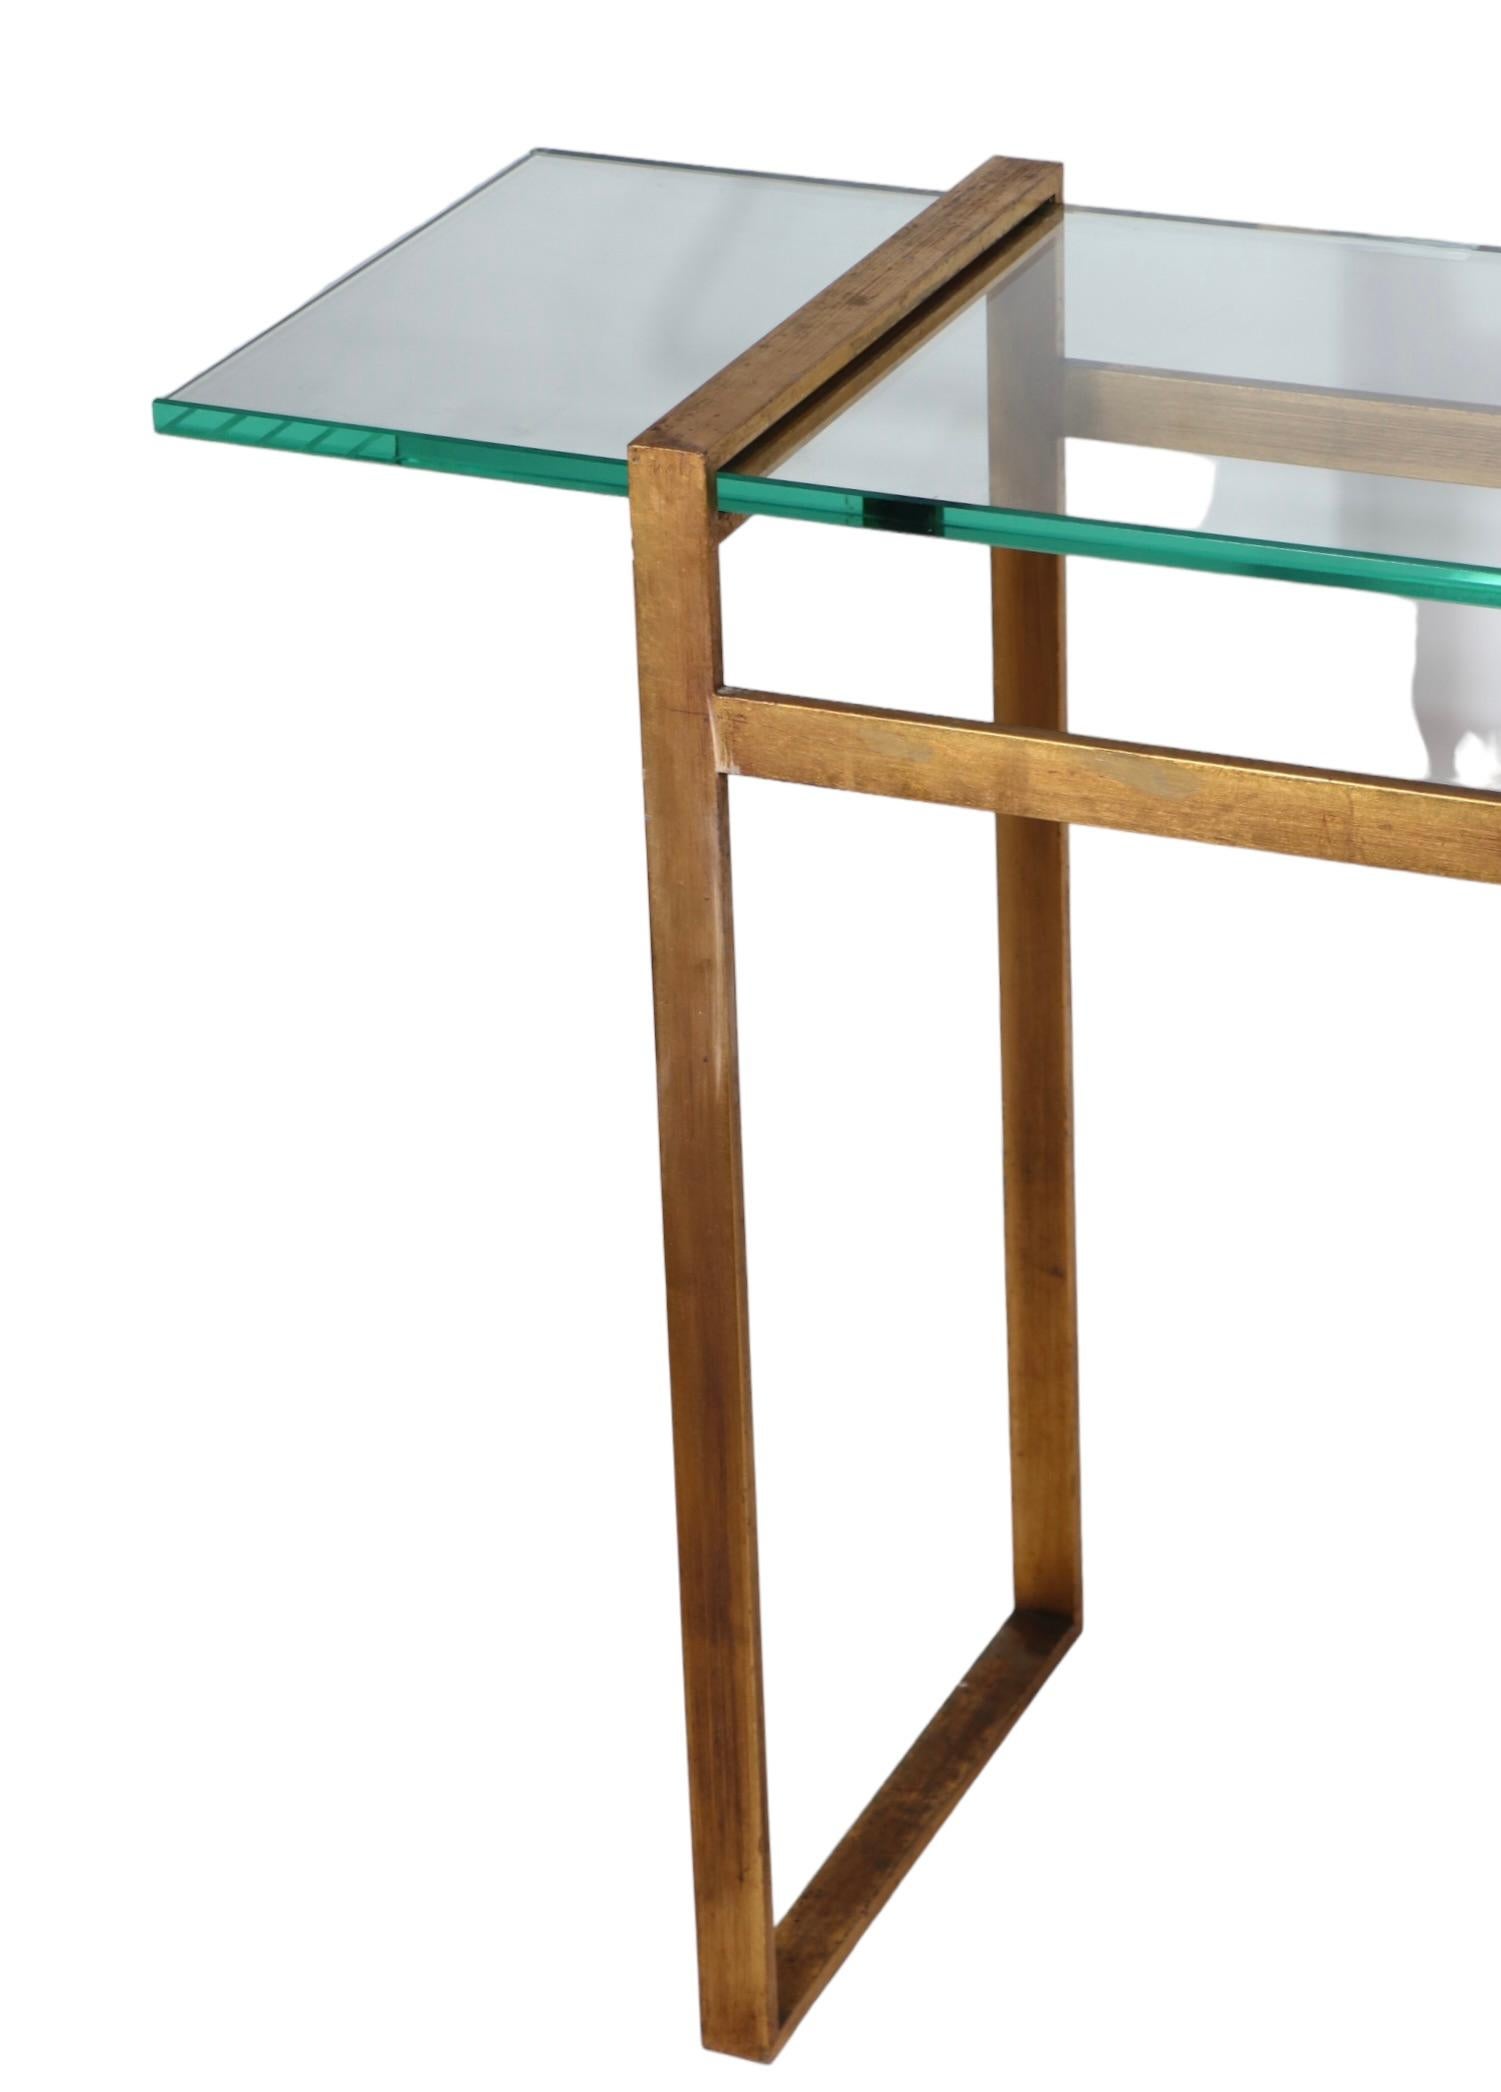 Large Modernist Metal and Glass Console in Faux Gilt Finish c 1970’s For Sale 7